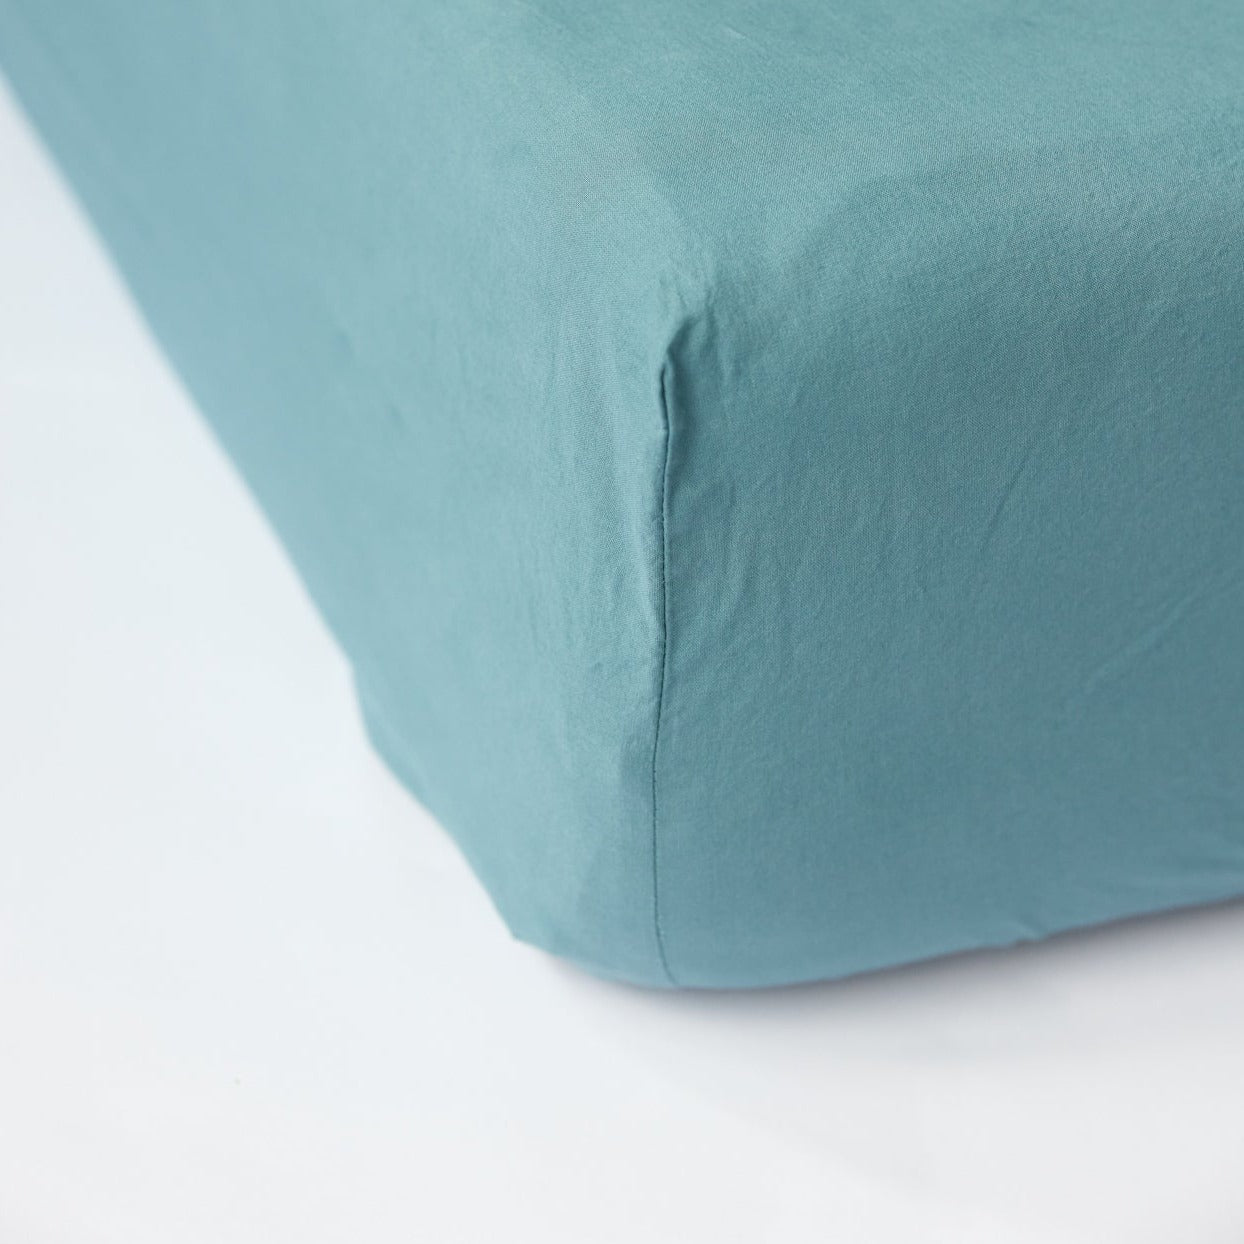 Fitted sheet “Sea”